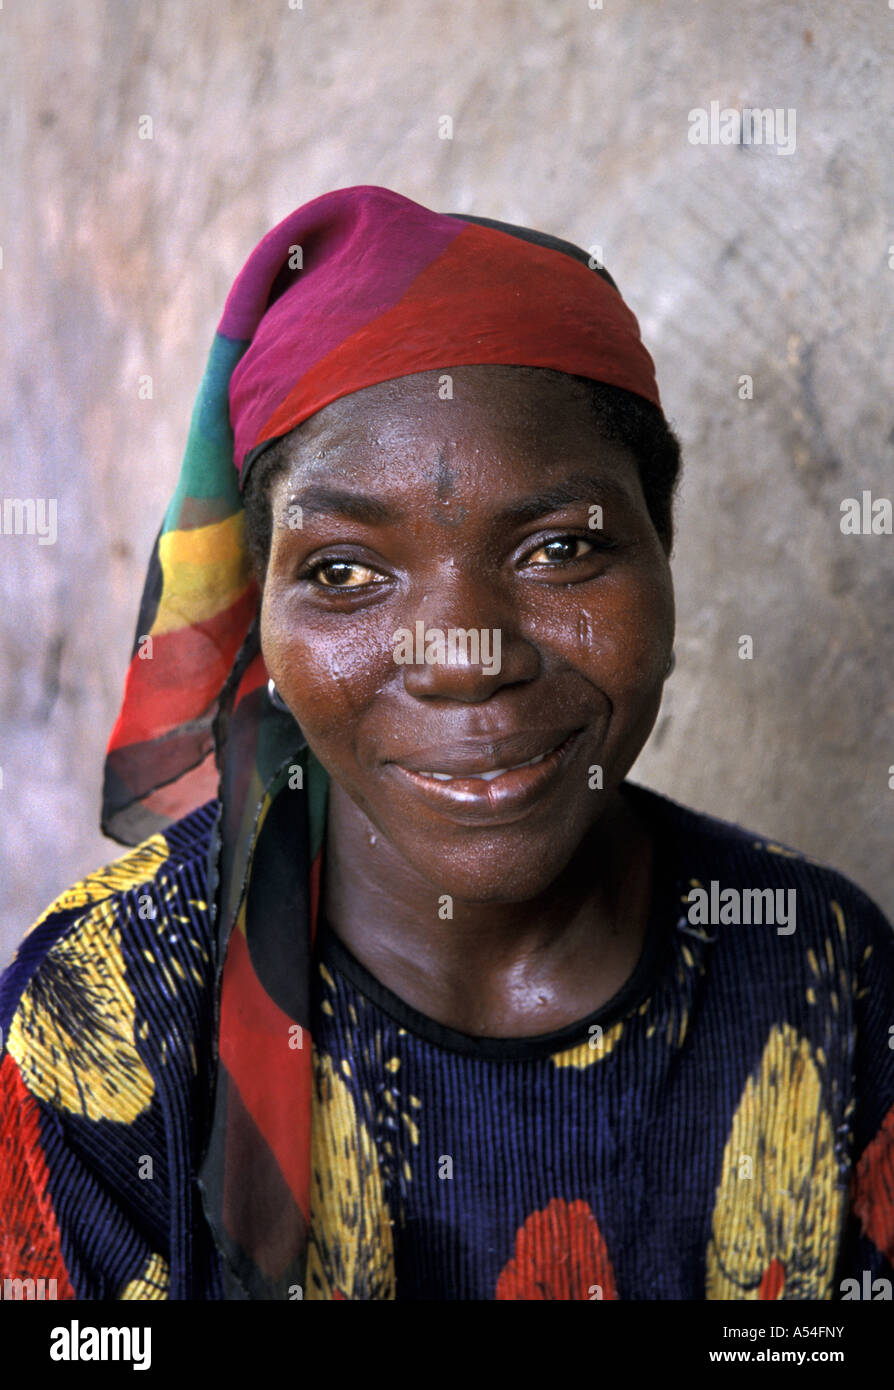 Painet hn2176 7679 ghana woman bolgatanga country developing nation less economically developed culture emerging market Stock Photo